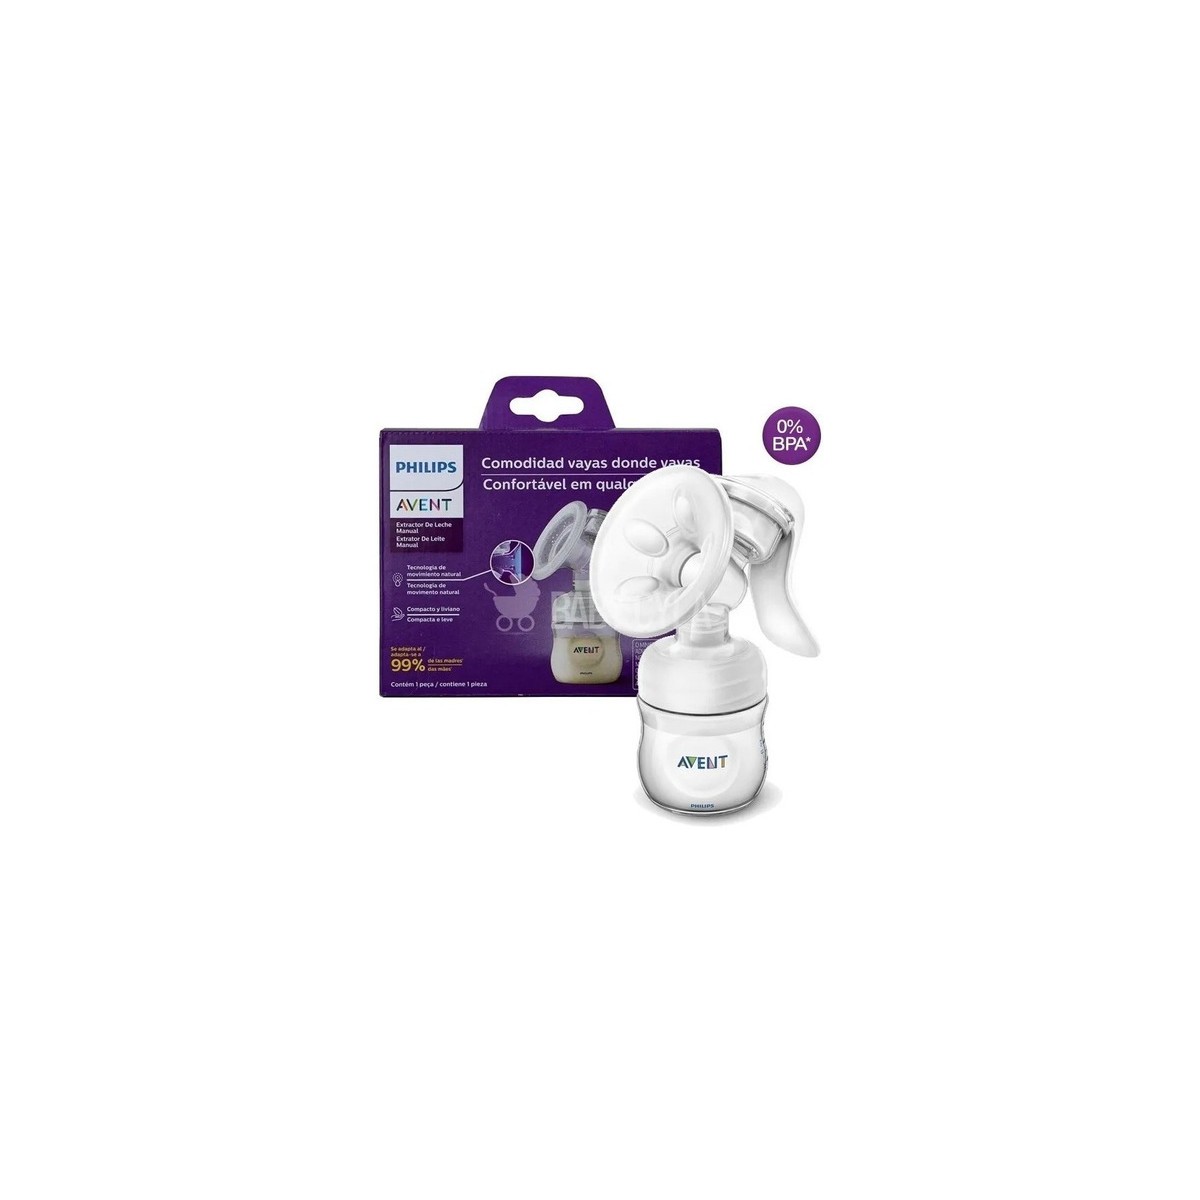 Philips Avent Sacaleches manual SCF430/01 